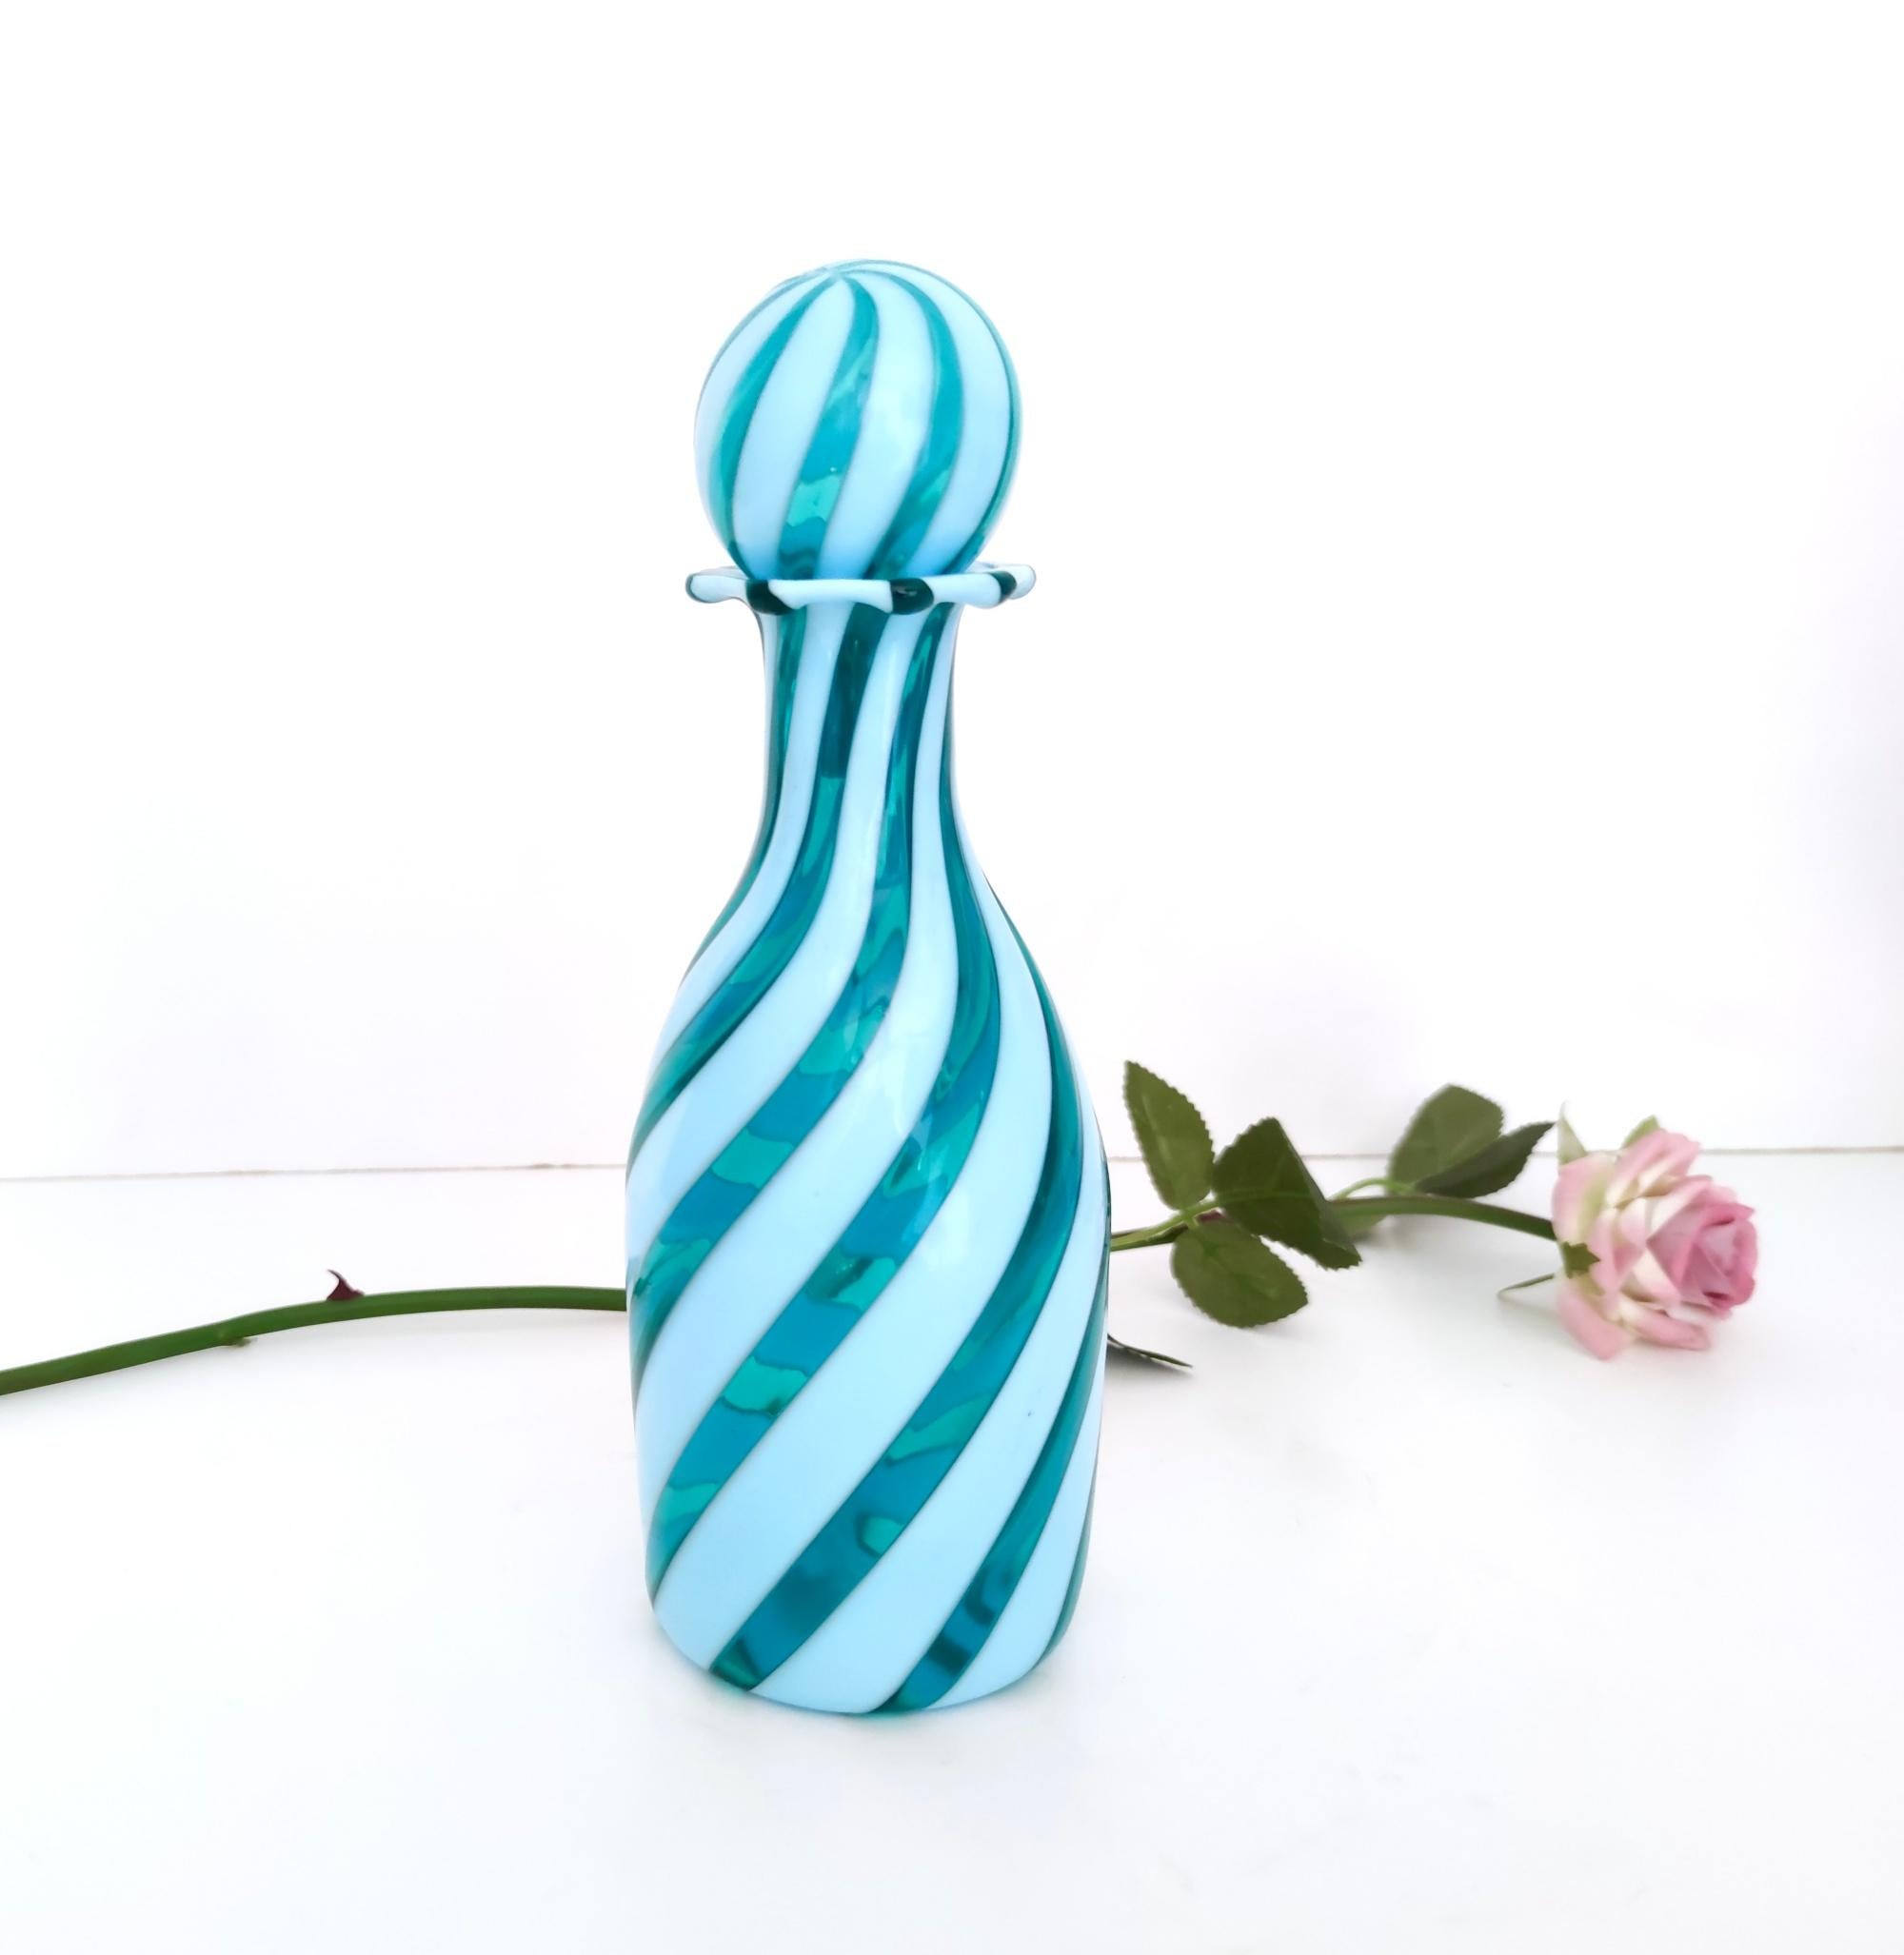 Made in Italy, 1950s.
This decanter is made in Murano glass and features teal and white canes.
It has particles of coal that are included in the glass due to its process of manufacturing: as a matter of fact in 1950s in Murano, wood-burning ovens